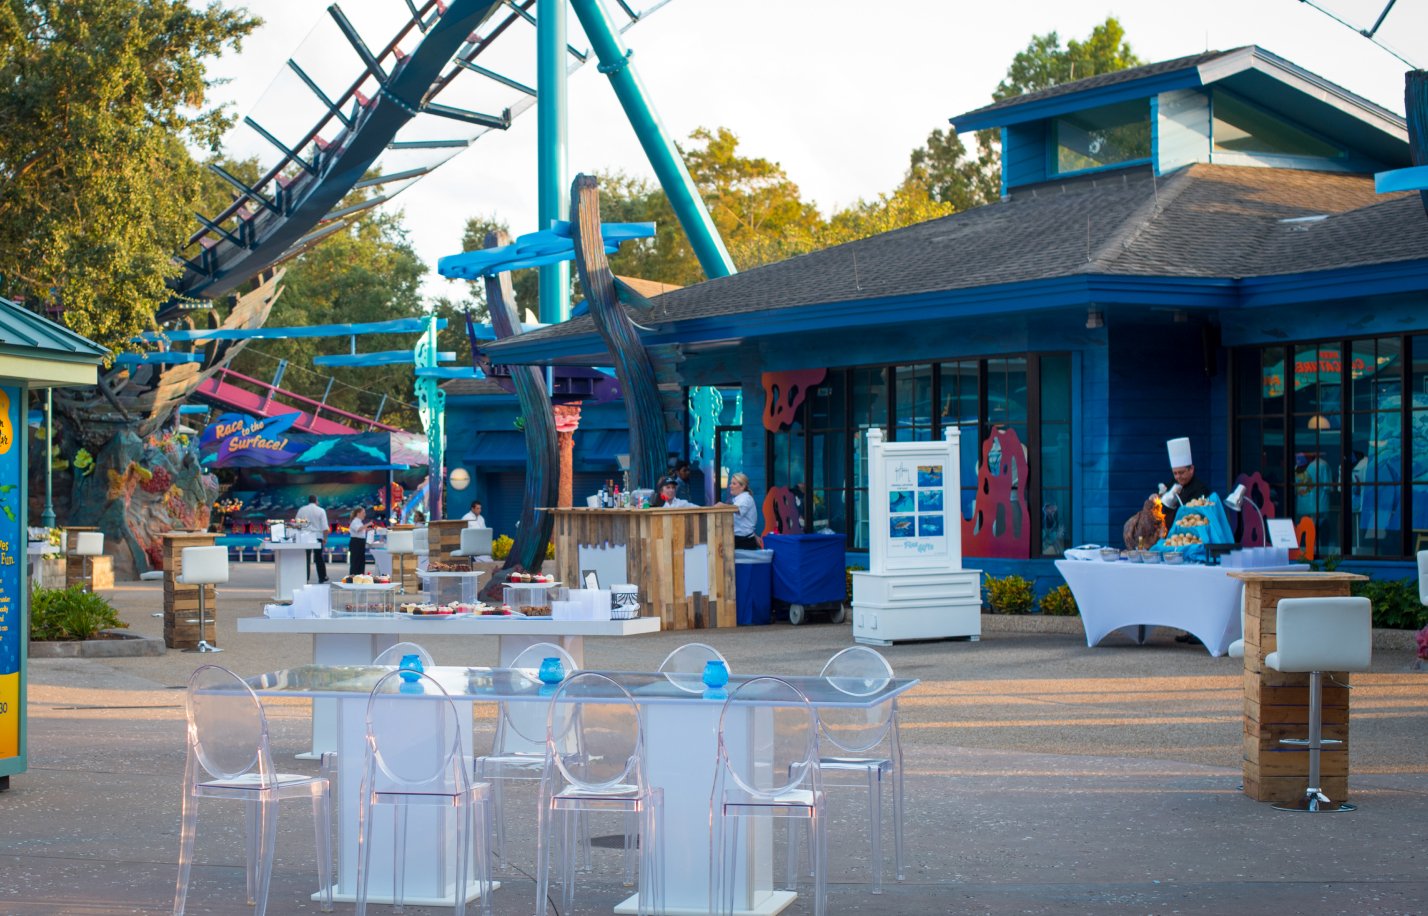 Mako™ area dressed up for an Event at SeaWorld Orlando.